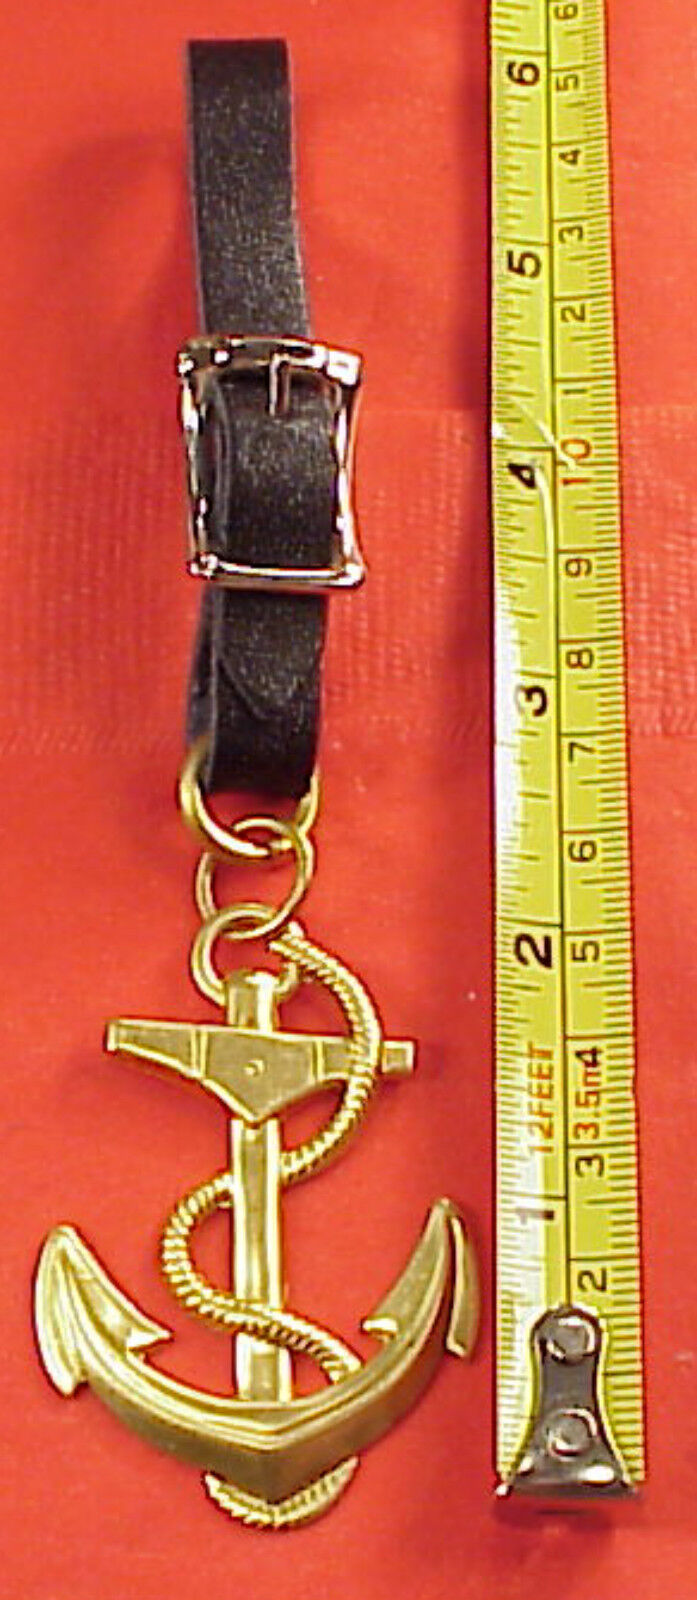 Vintage Brass Ship Anchor Rope 1 1/2 in wd 2 1/4 ht  Pocket Watch Fob KeyChain 